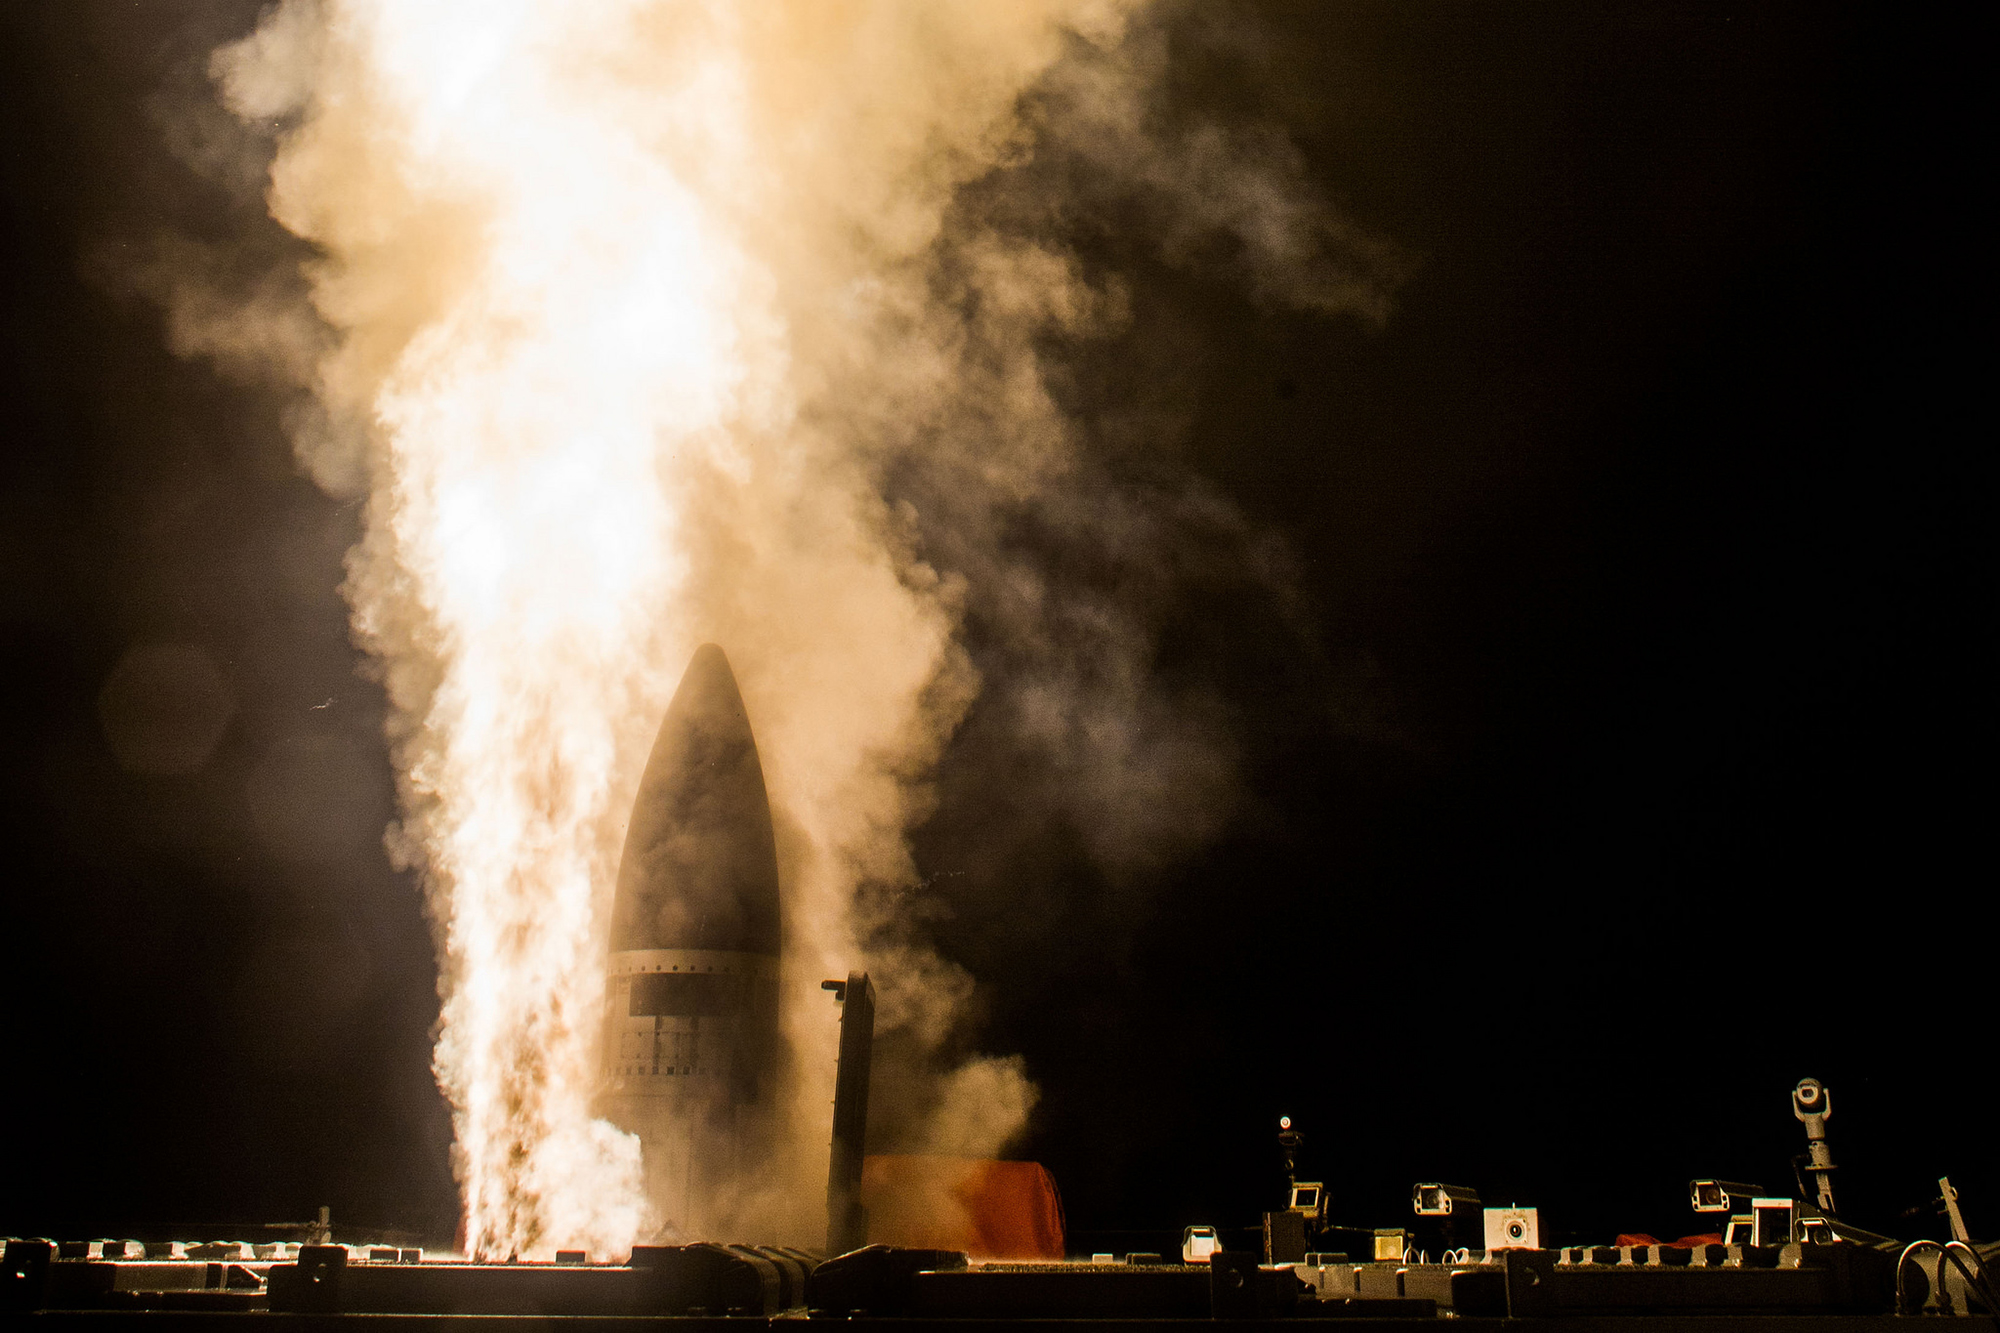 A Standard Missile-3 (SM-3) Block IIA is launched from the guided-missile destroyer USS John Paul Jones (DDG 53) during a flight test off Hawaii in 2017